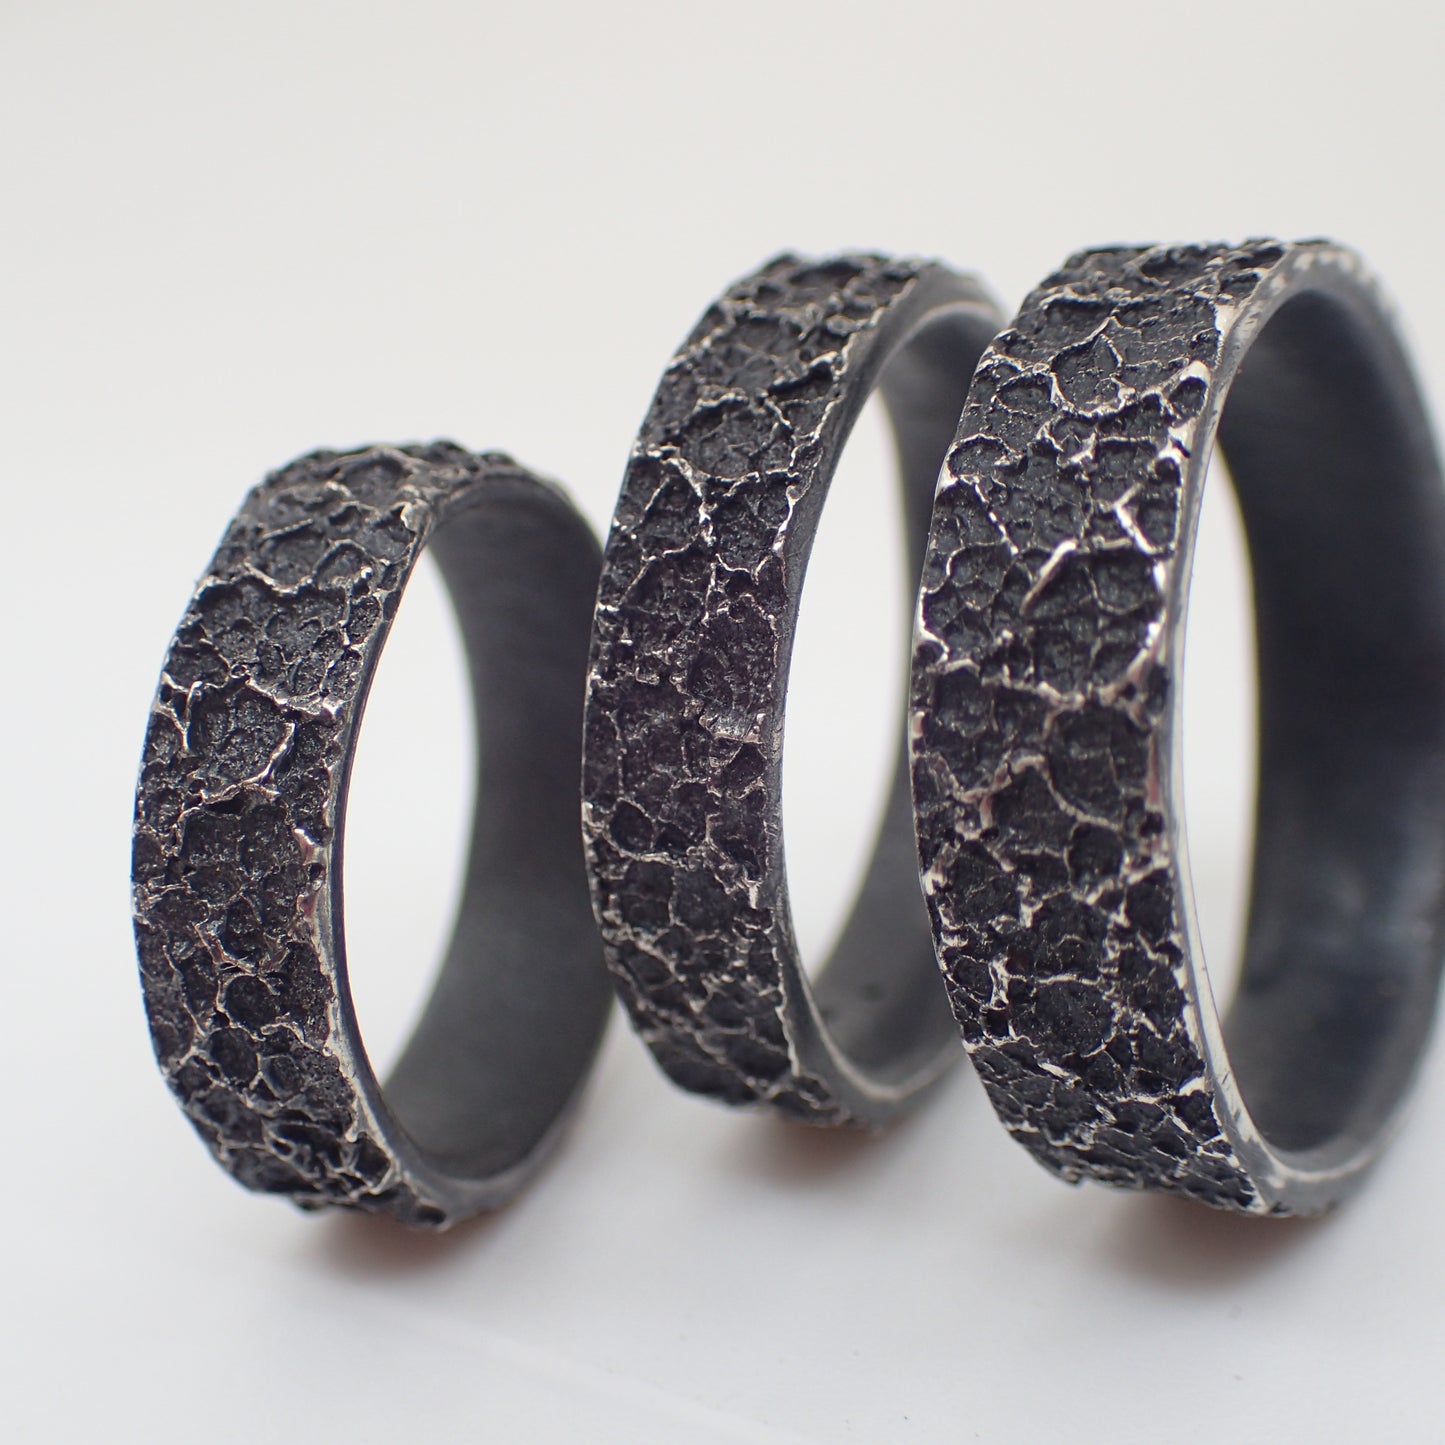 'Burnt Milk' Ring. Textured ring in oxidised eco silver.-Jewellery-Beca Beeby